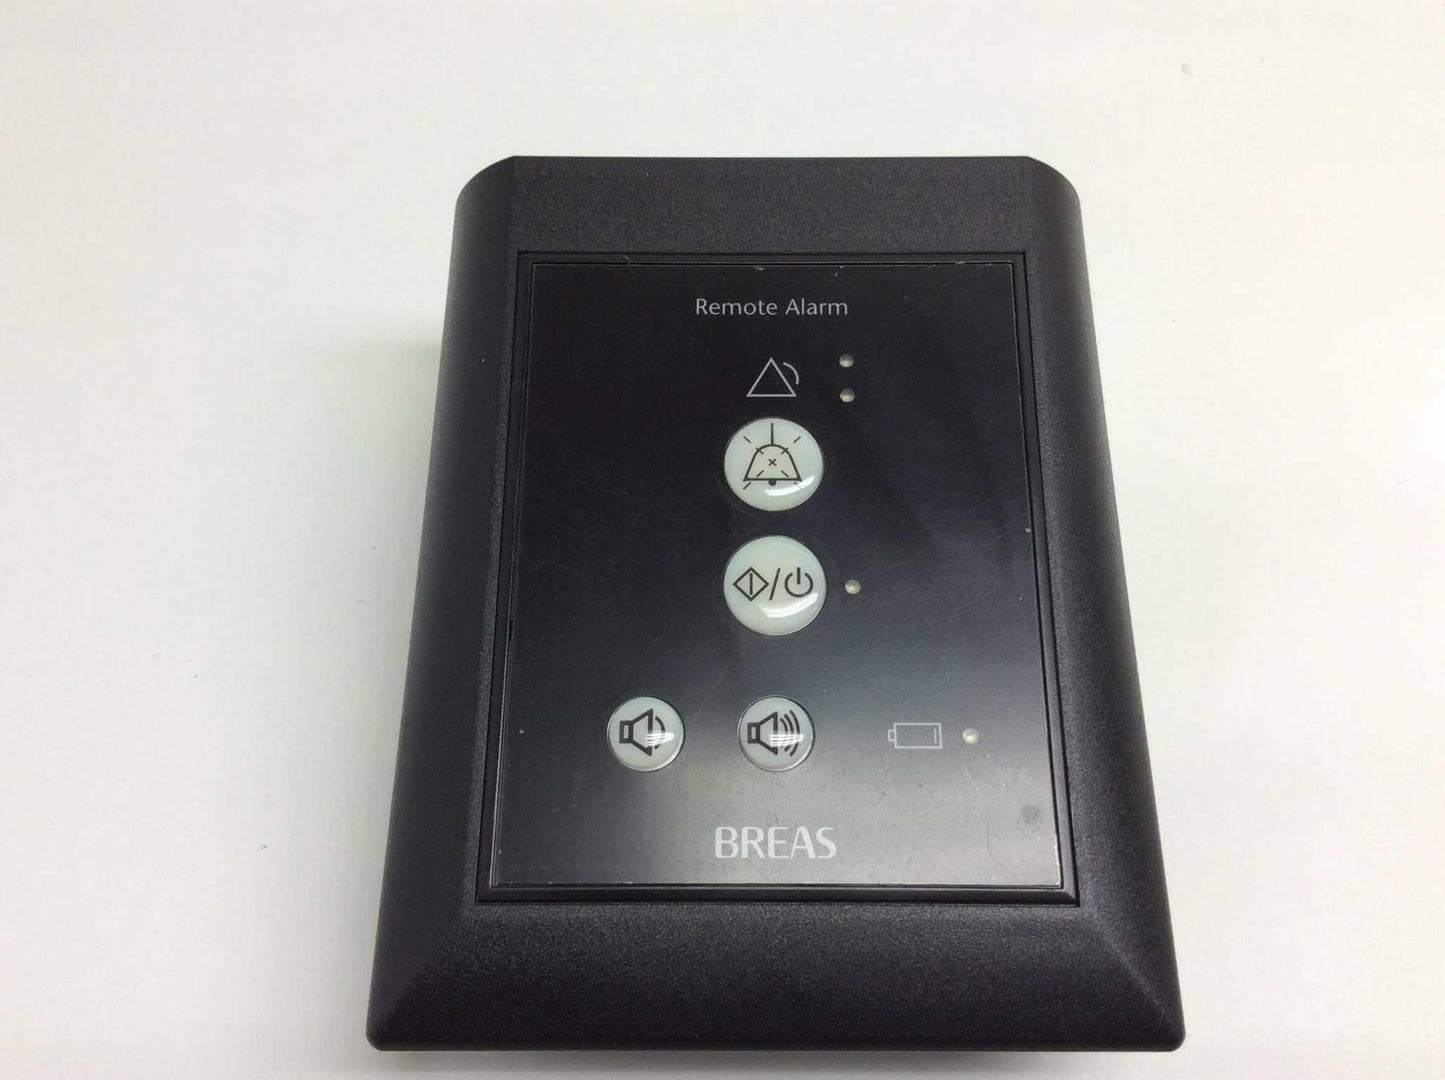 NEW Breas HDM Remote Alarm 10M Cable Included for the Vivo 50 60 005036 Warranty FREE Shipping - MBR Medicals